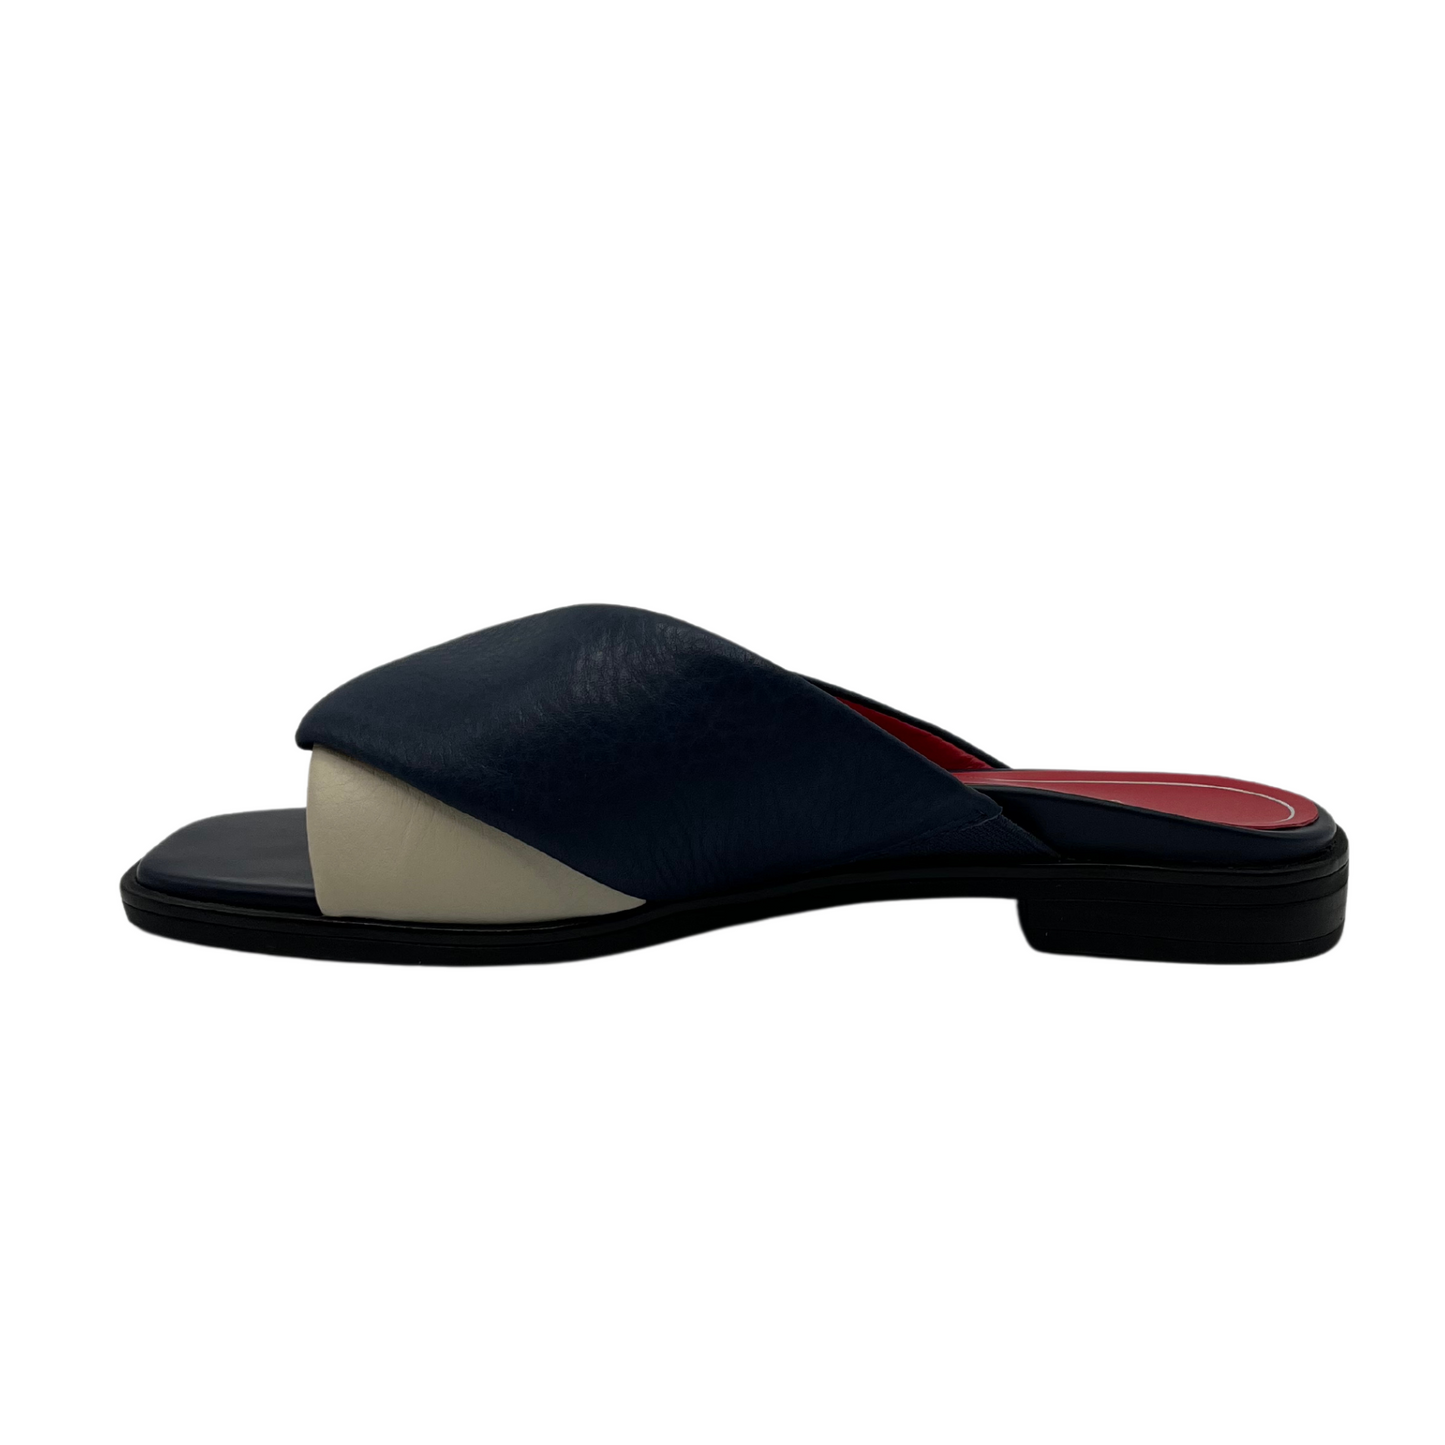 Left facing view of navy and cream leather slip on with square toe and red inner lining